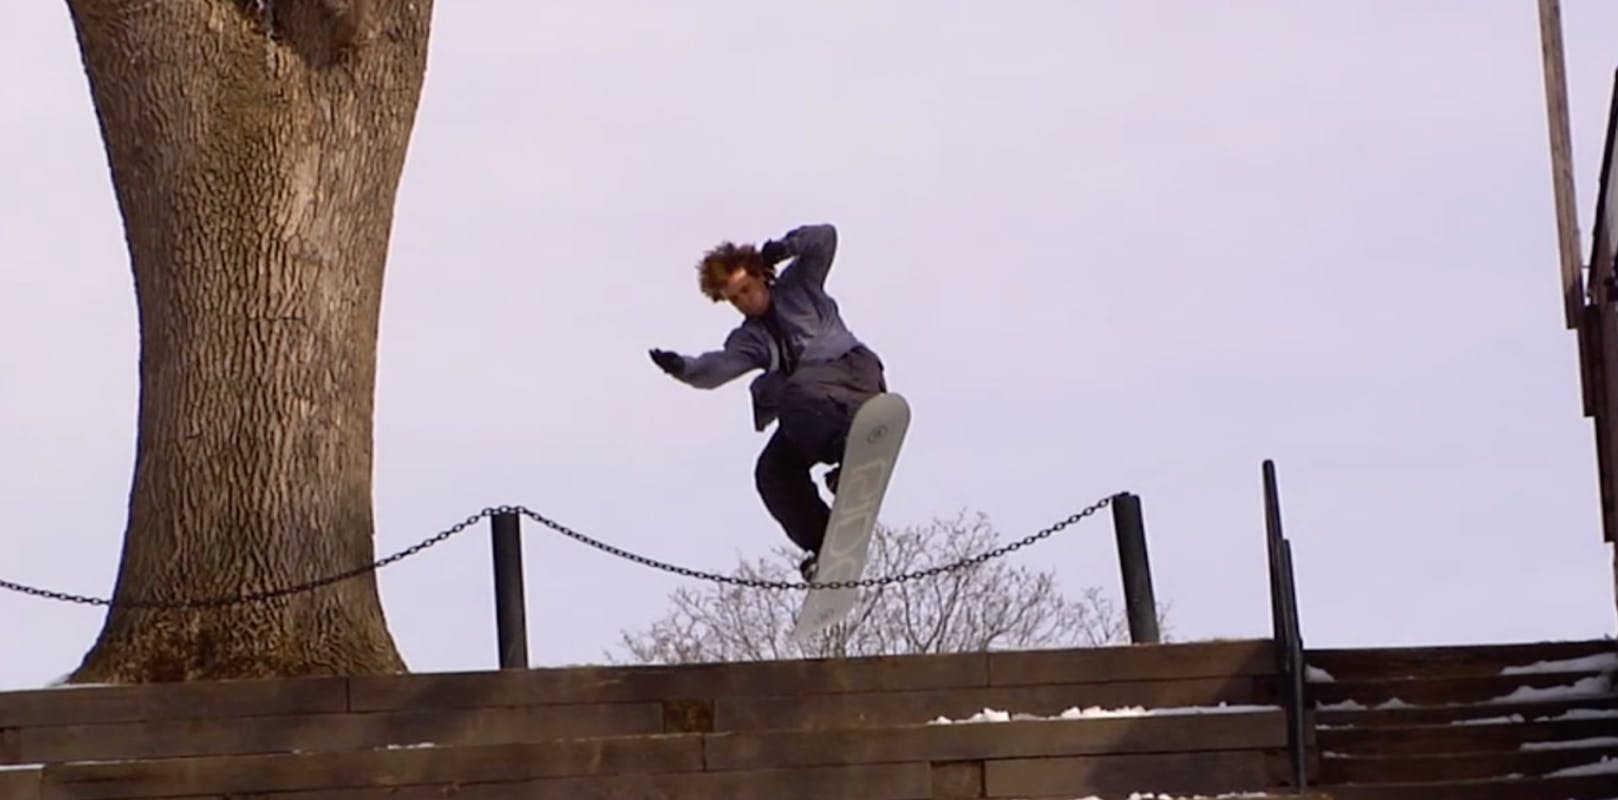 A snowboarder jumping on the Ride Agenda Snowboard.